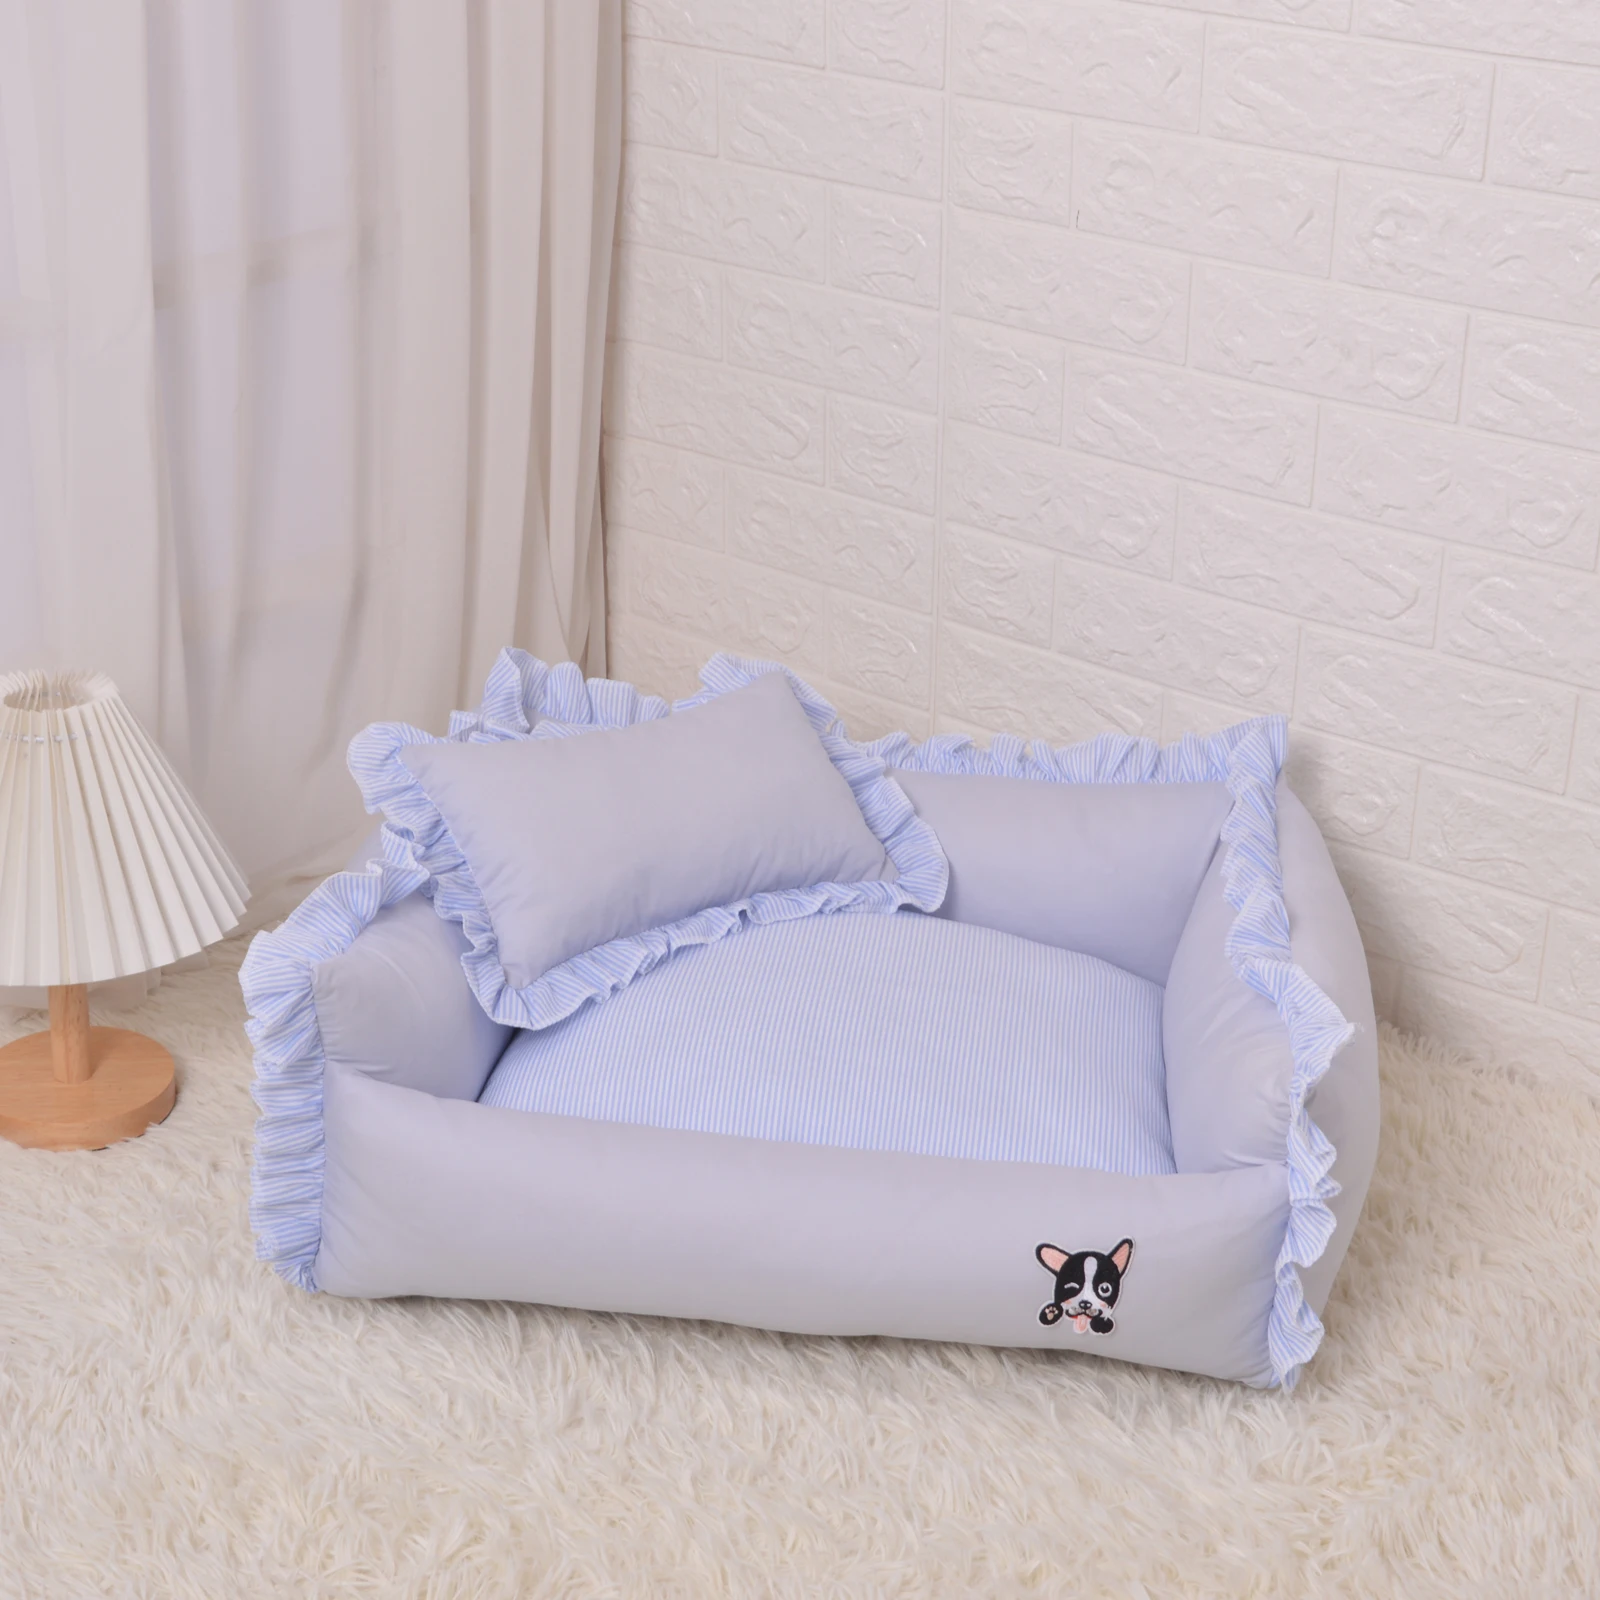 Highly Resilient Pet Sofa Nest Exquisite Cotton Jacket Comfortable And Breathable Full-Body Detachable Pet Nest Handmade Custom